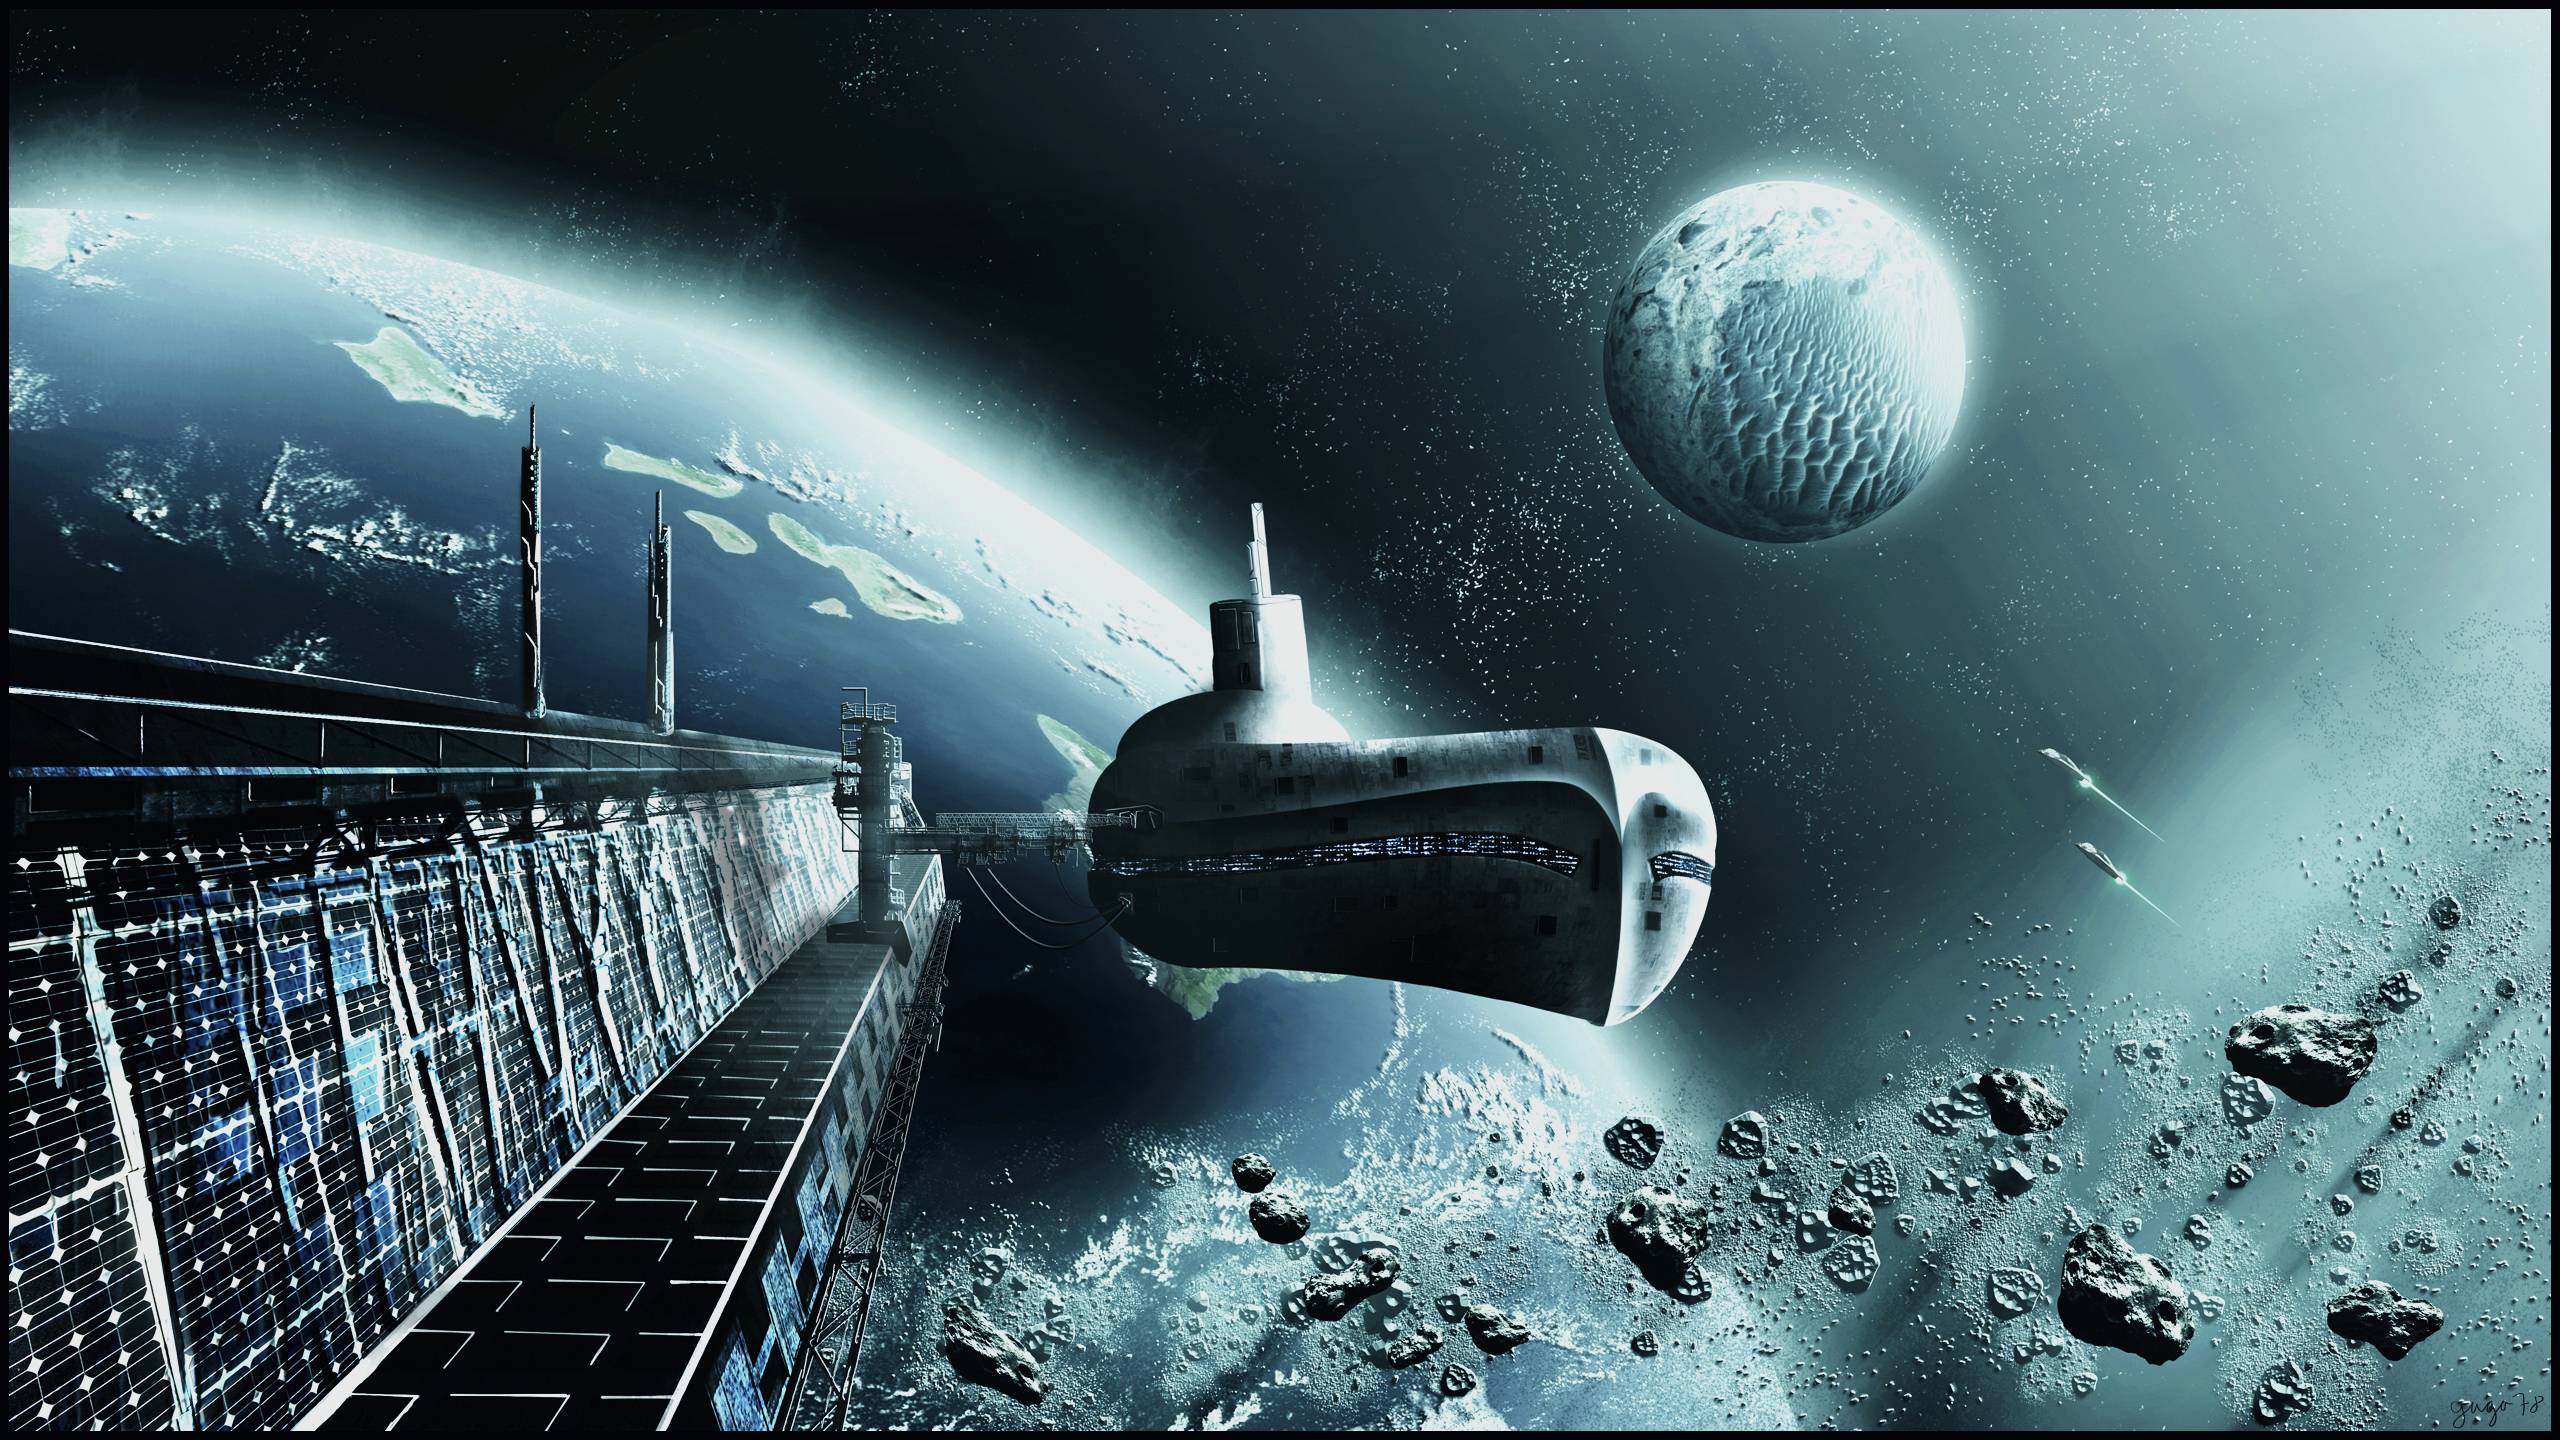 Technics Ships Planets Asteroids space spaceship submarine